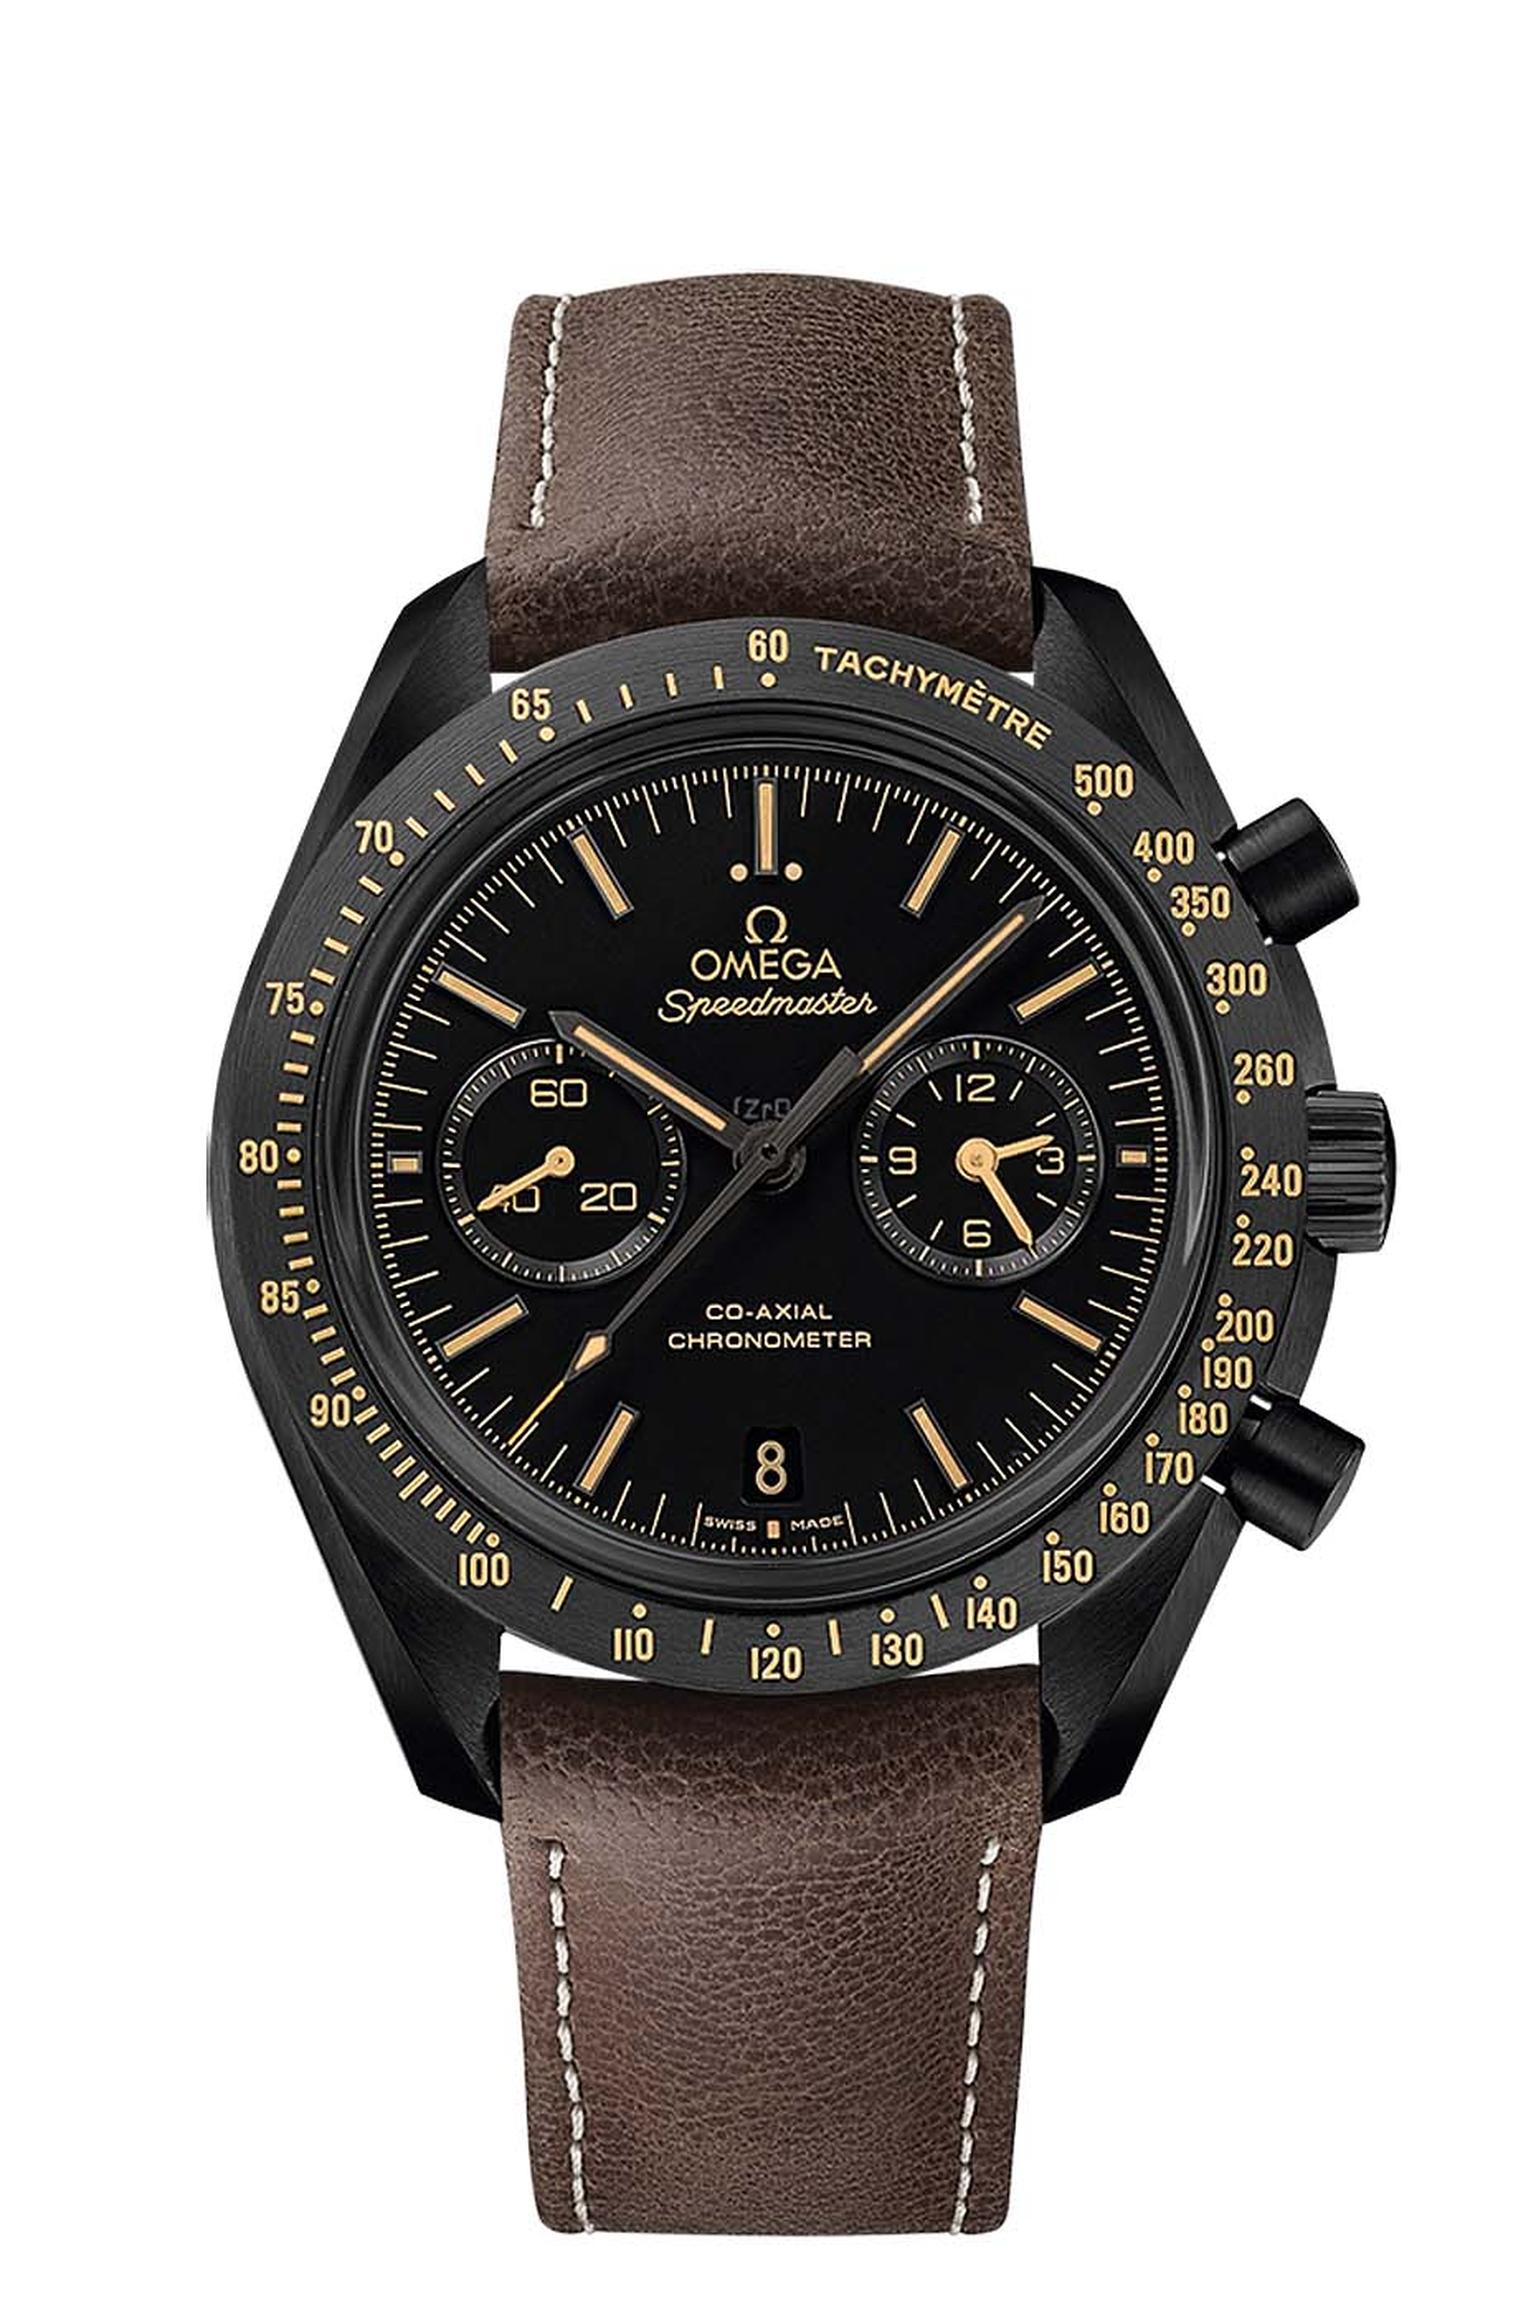 Omega Speedmaster Dark Side of the Moon Vintage Black model with brown indices, hands and indications highlighted with vintage coloured Super-LumiNova. Like the other models, the matte ceramic dial with the iconic tachymetre scale has been created with la